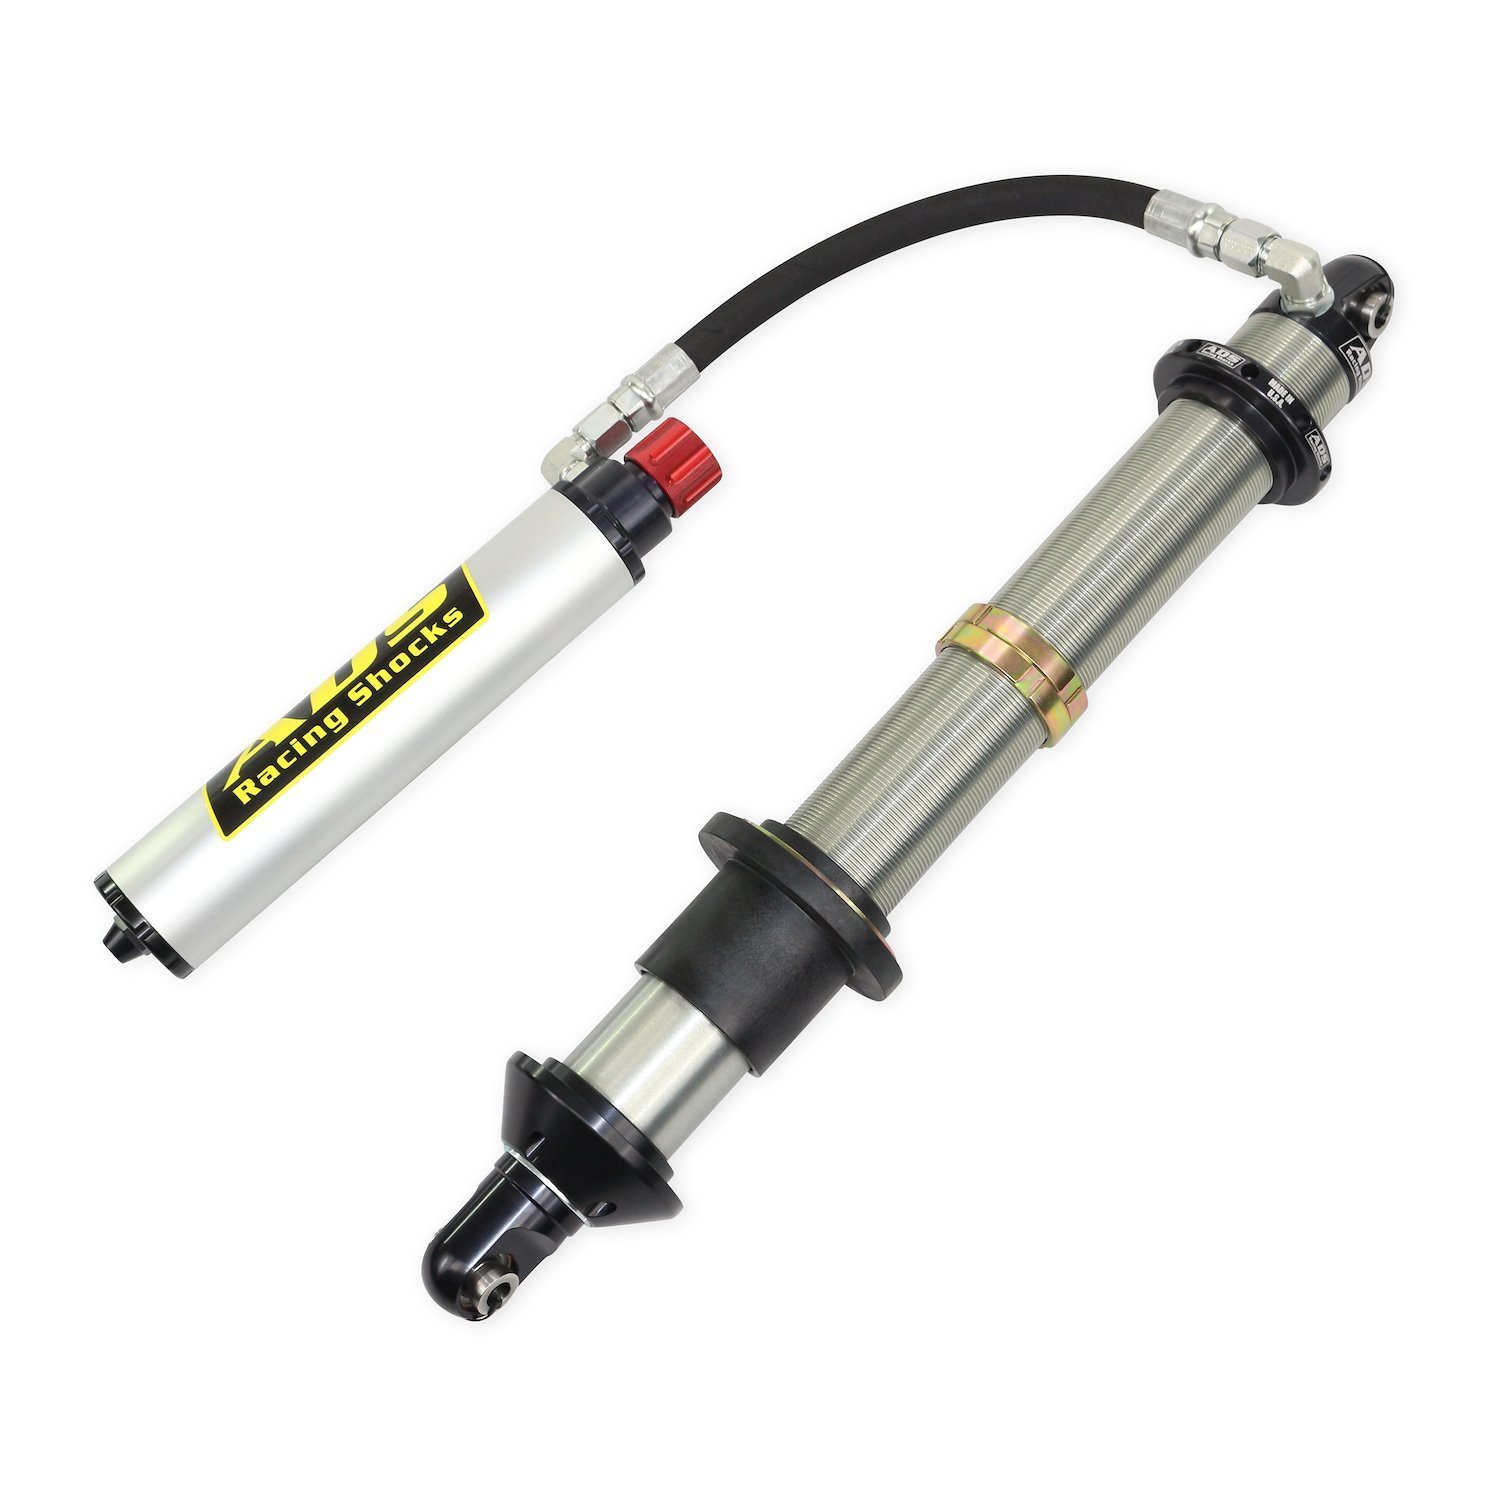 250-COR14-A90 Coil-Over Race Shock, 2.5 in. x 14 in. Stroke, w/ Remote Reservoir (90-Degree Hose), w/ Compression Adjustment